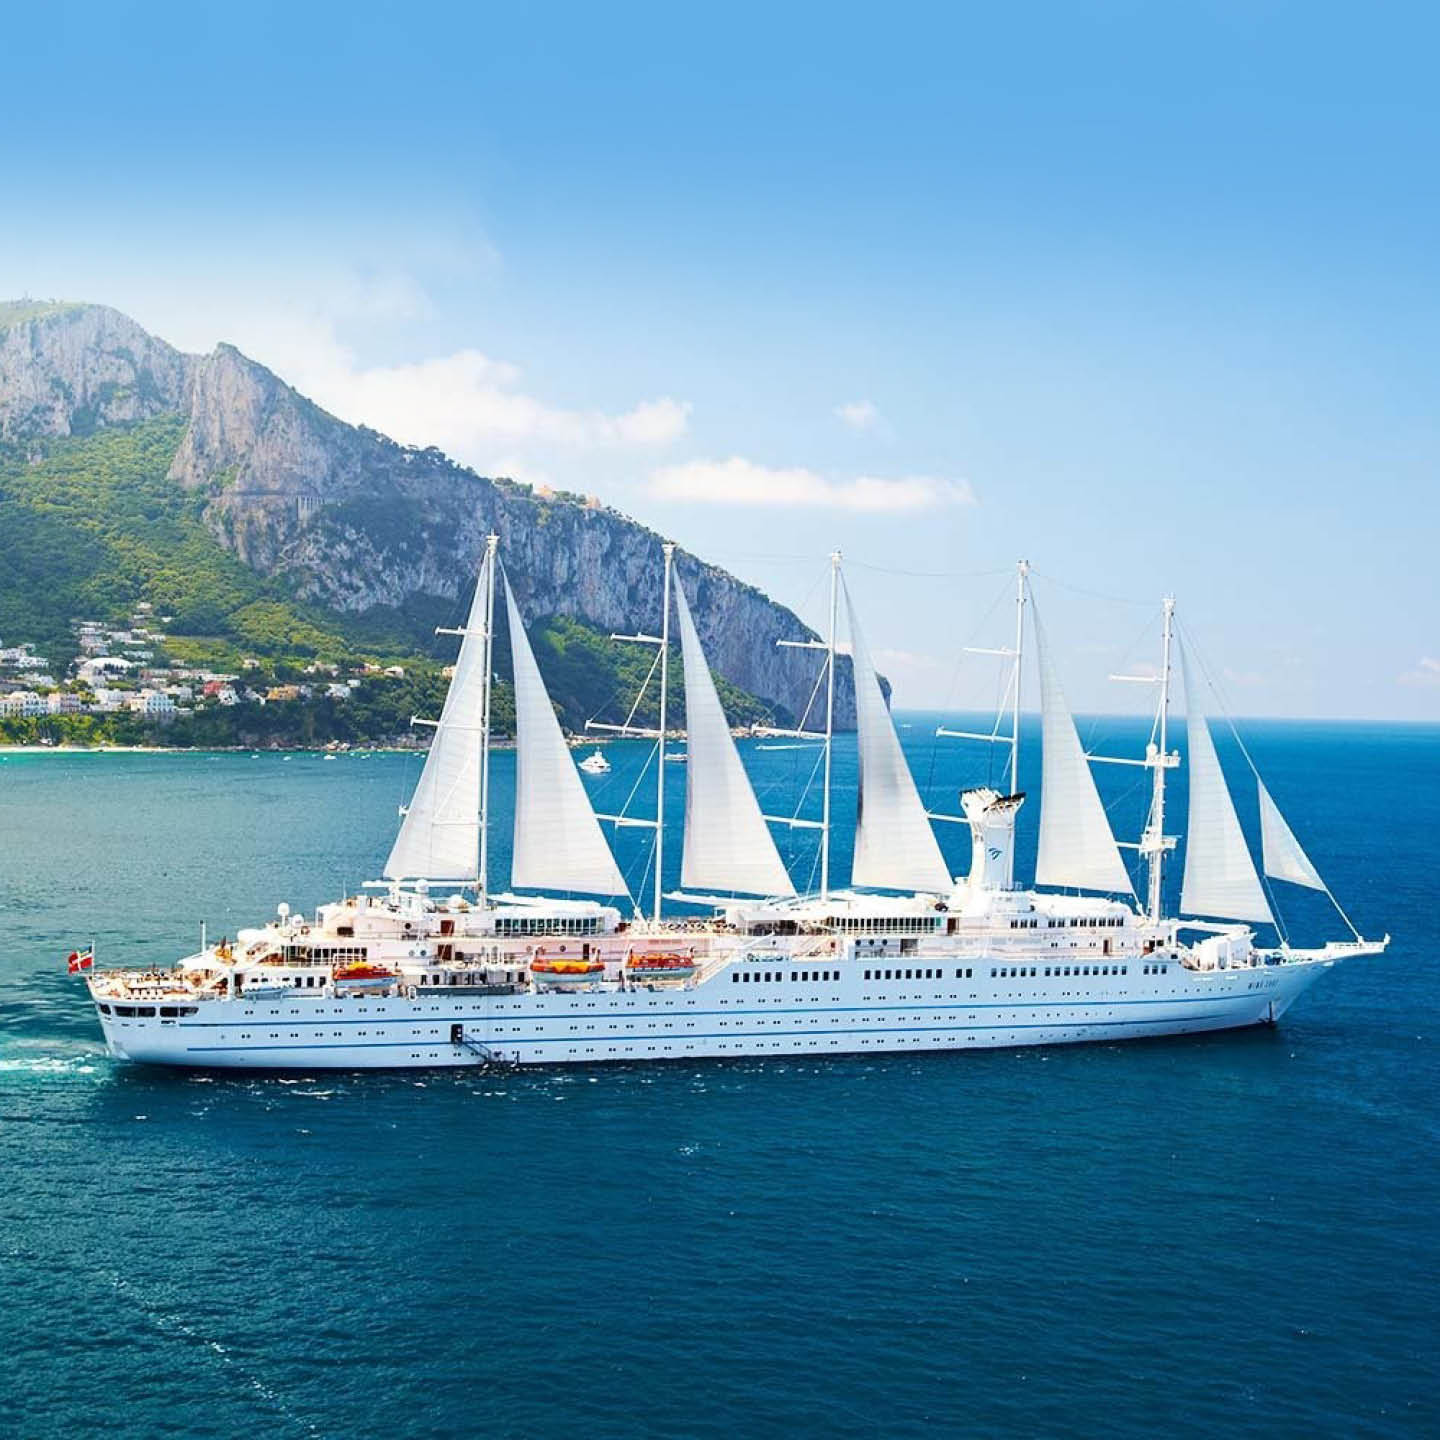 Windstar Cruises has drawn up a new seven days beach bum’s delight of a Caribbean itinerary beginning winter of 2023.